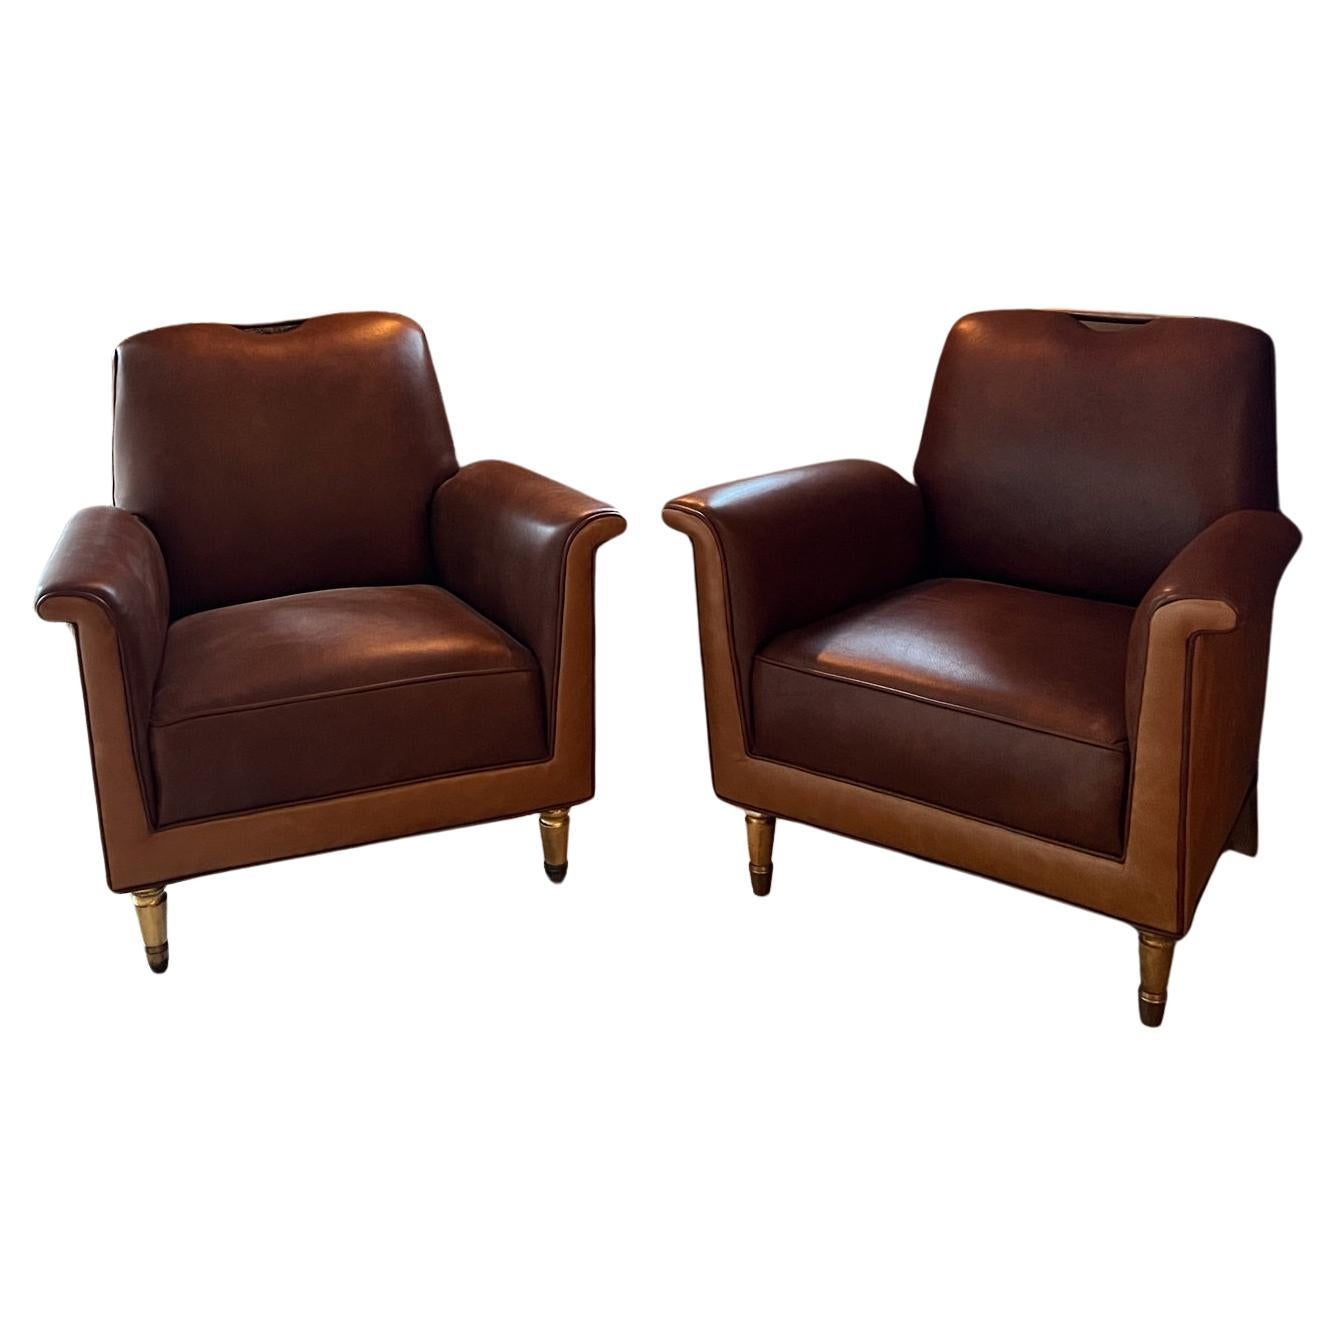 1950s Octavio Vidales Chairs Leather and Mahogany Mexico City For Sale